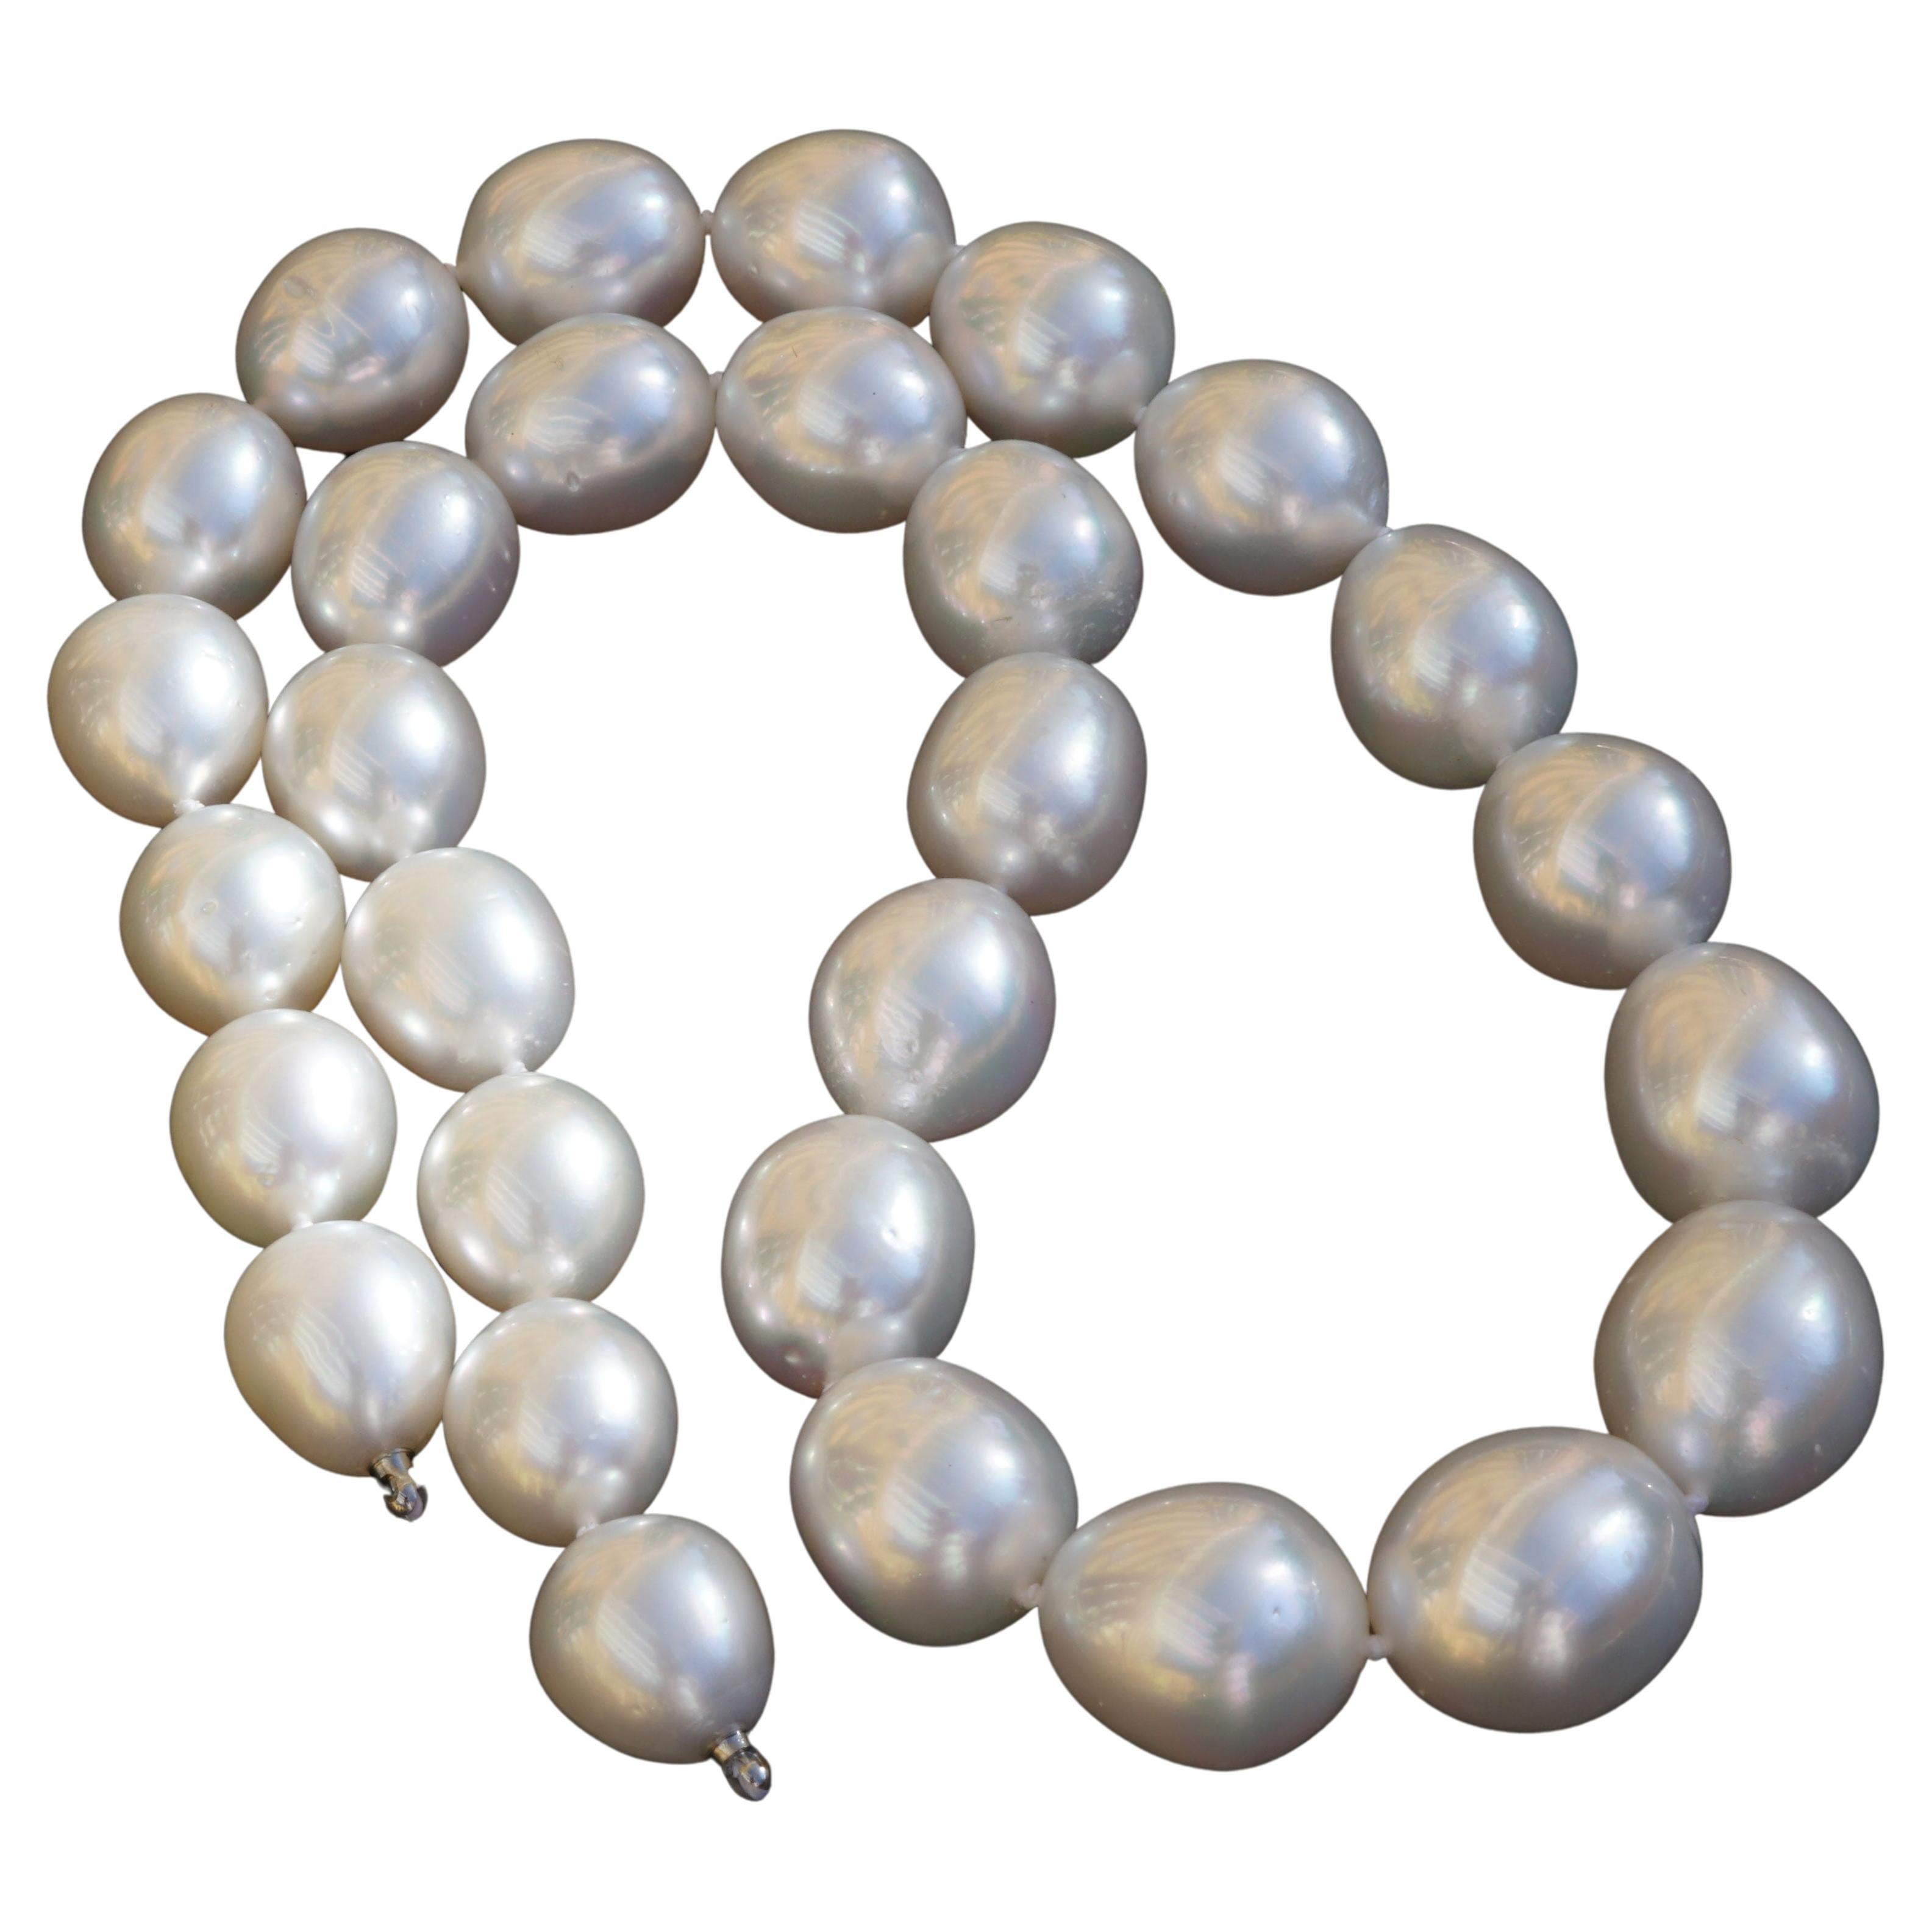 15 to 12 mm AAA+ South Sea Pearl Necklace Fine White Color Great Quality Luster For Sale